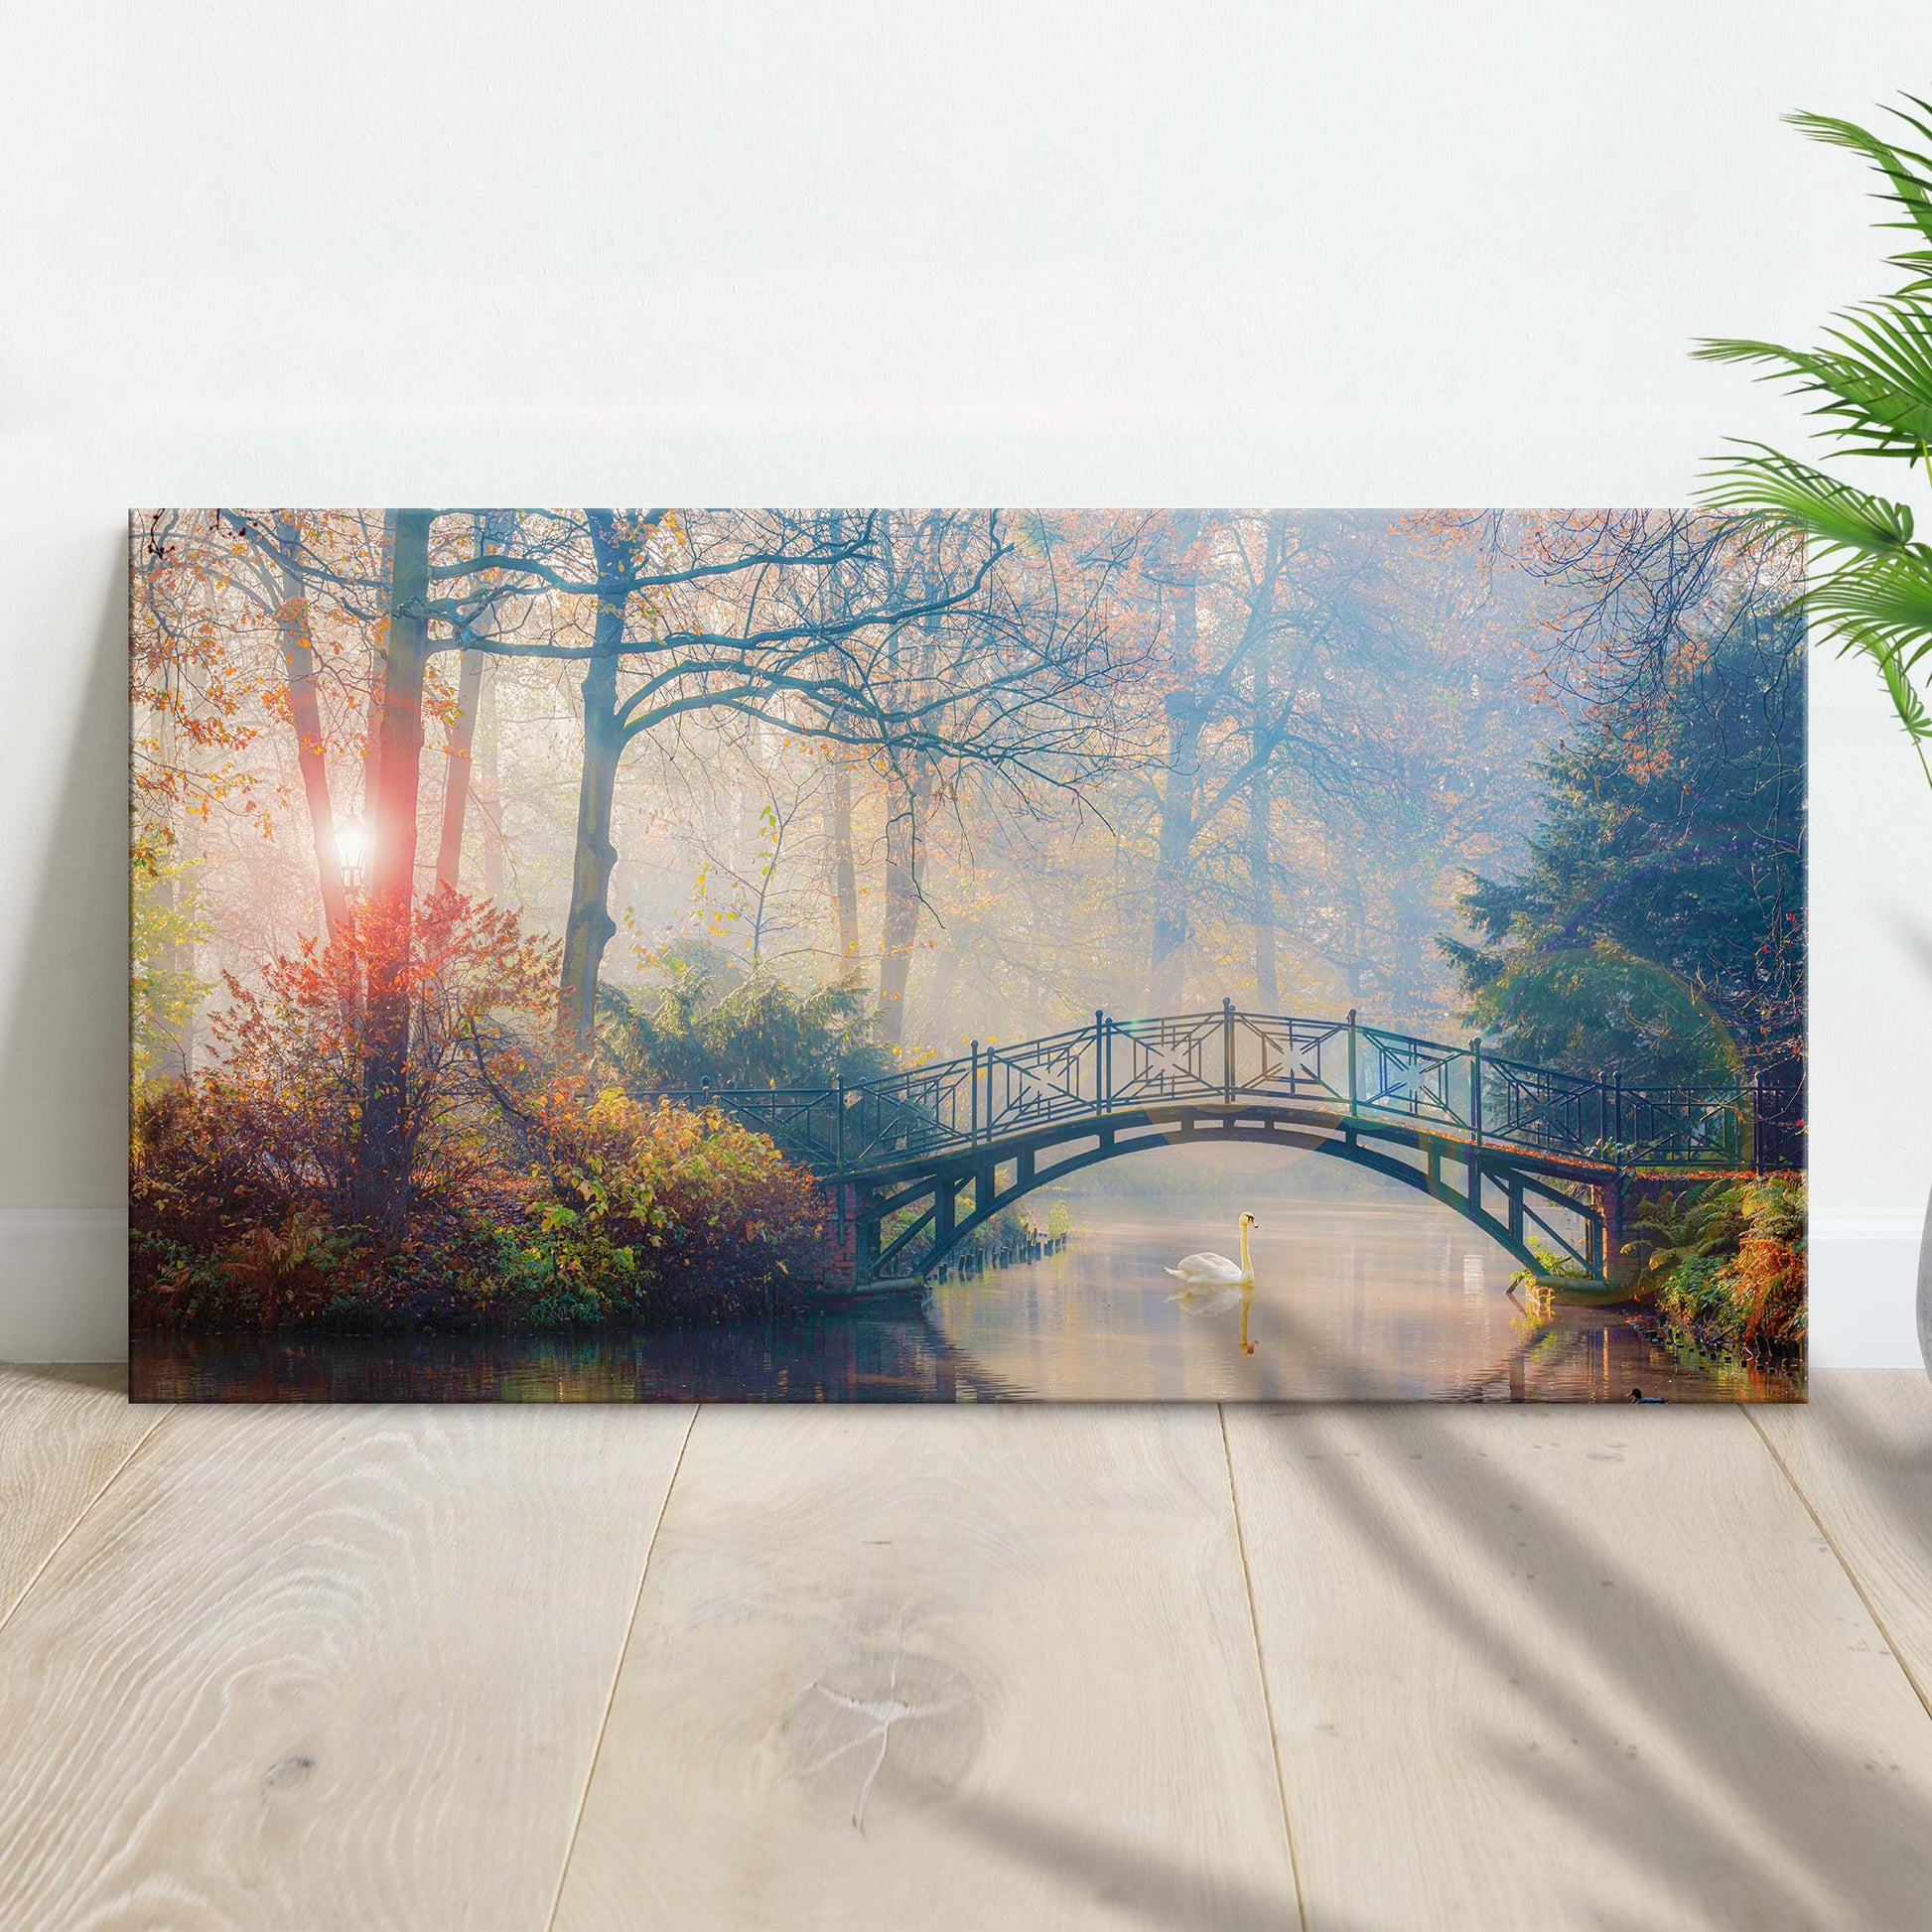 Misty Park Bridge Canvas Wall Art - Image by Tailored Canvases